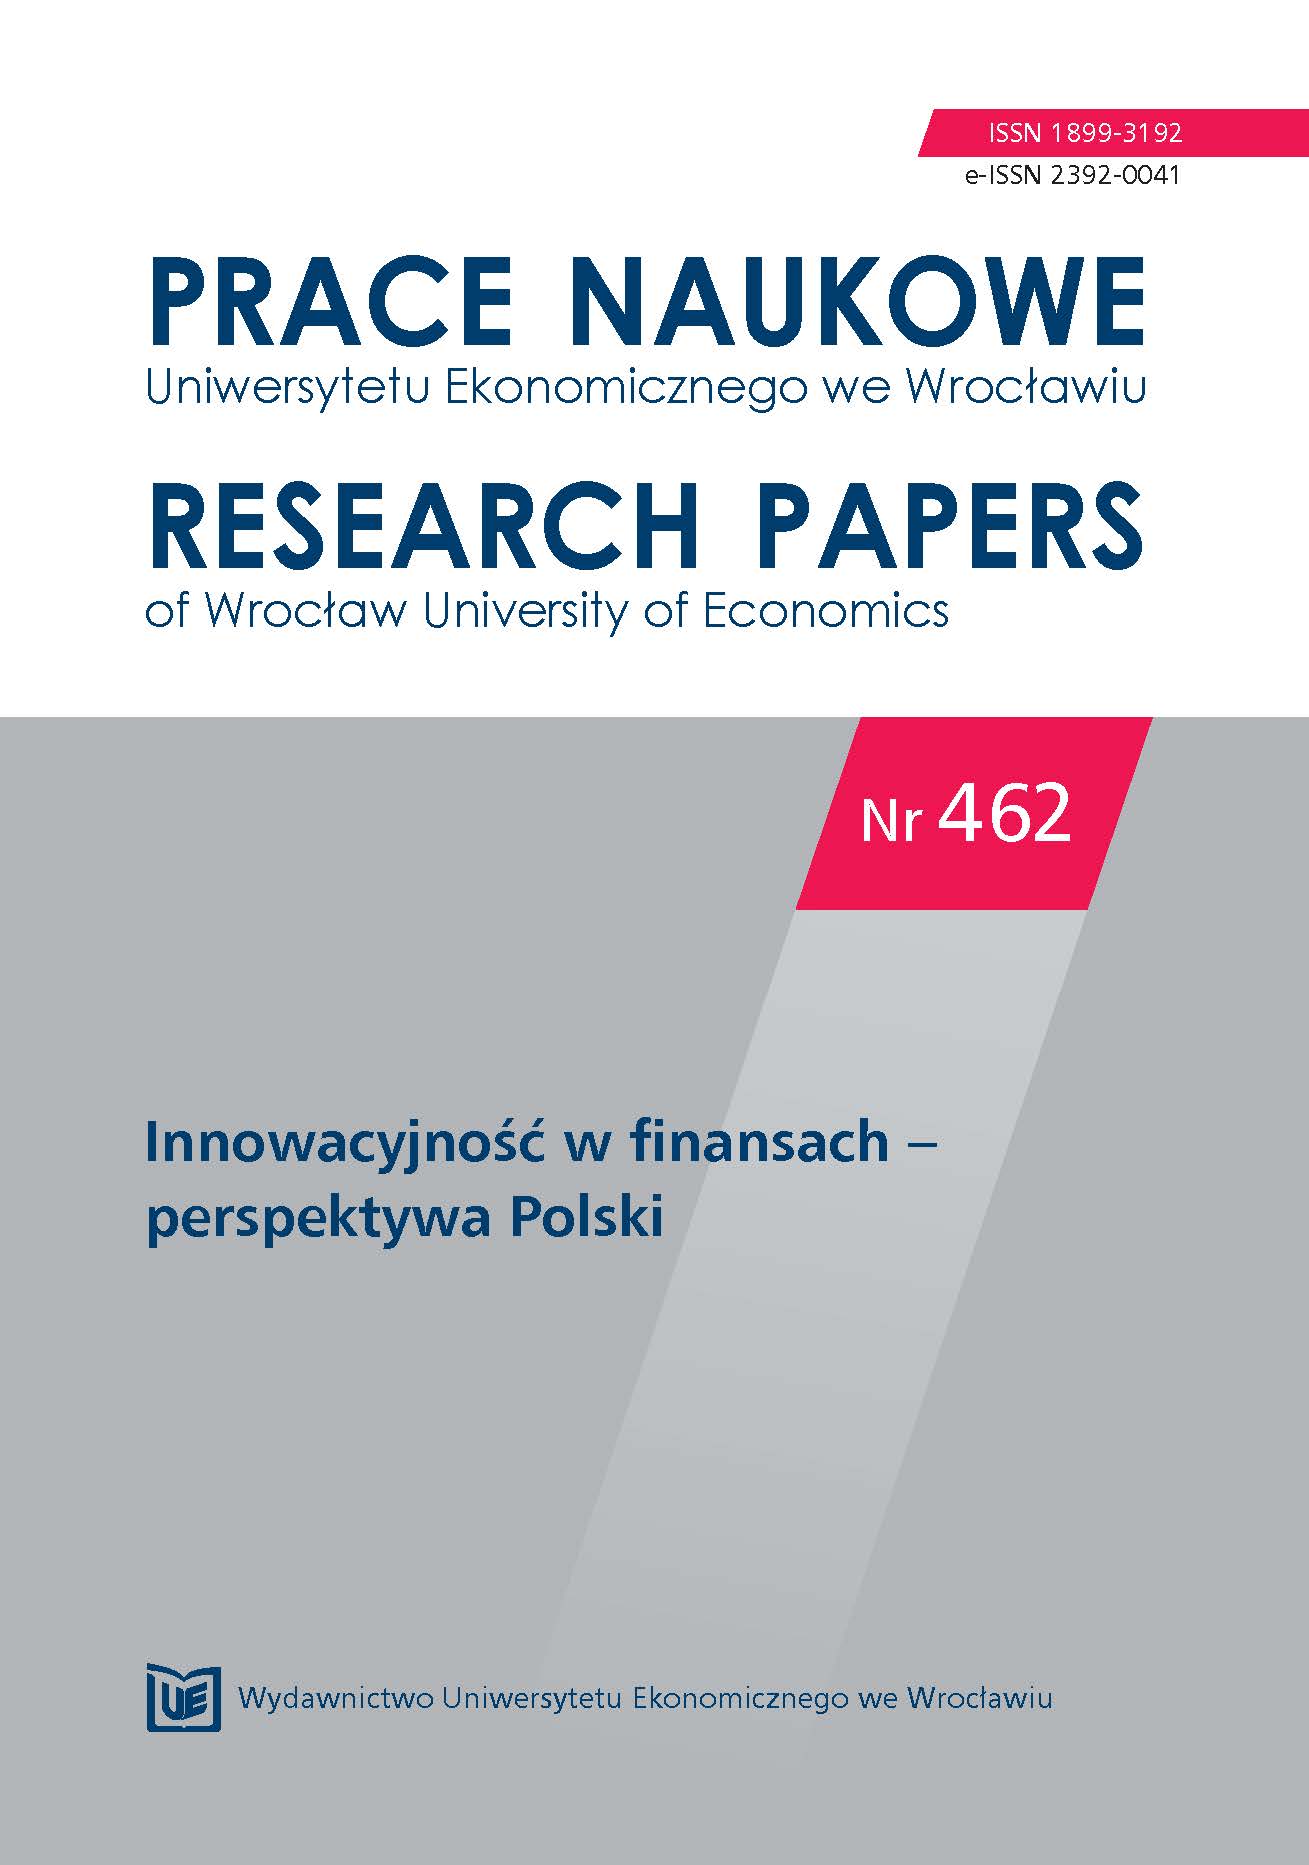 The models of interoperability in mobile payment systems - Polish m-payments market perspective Cover Image